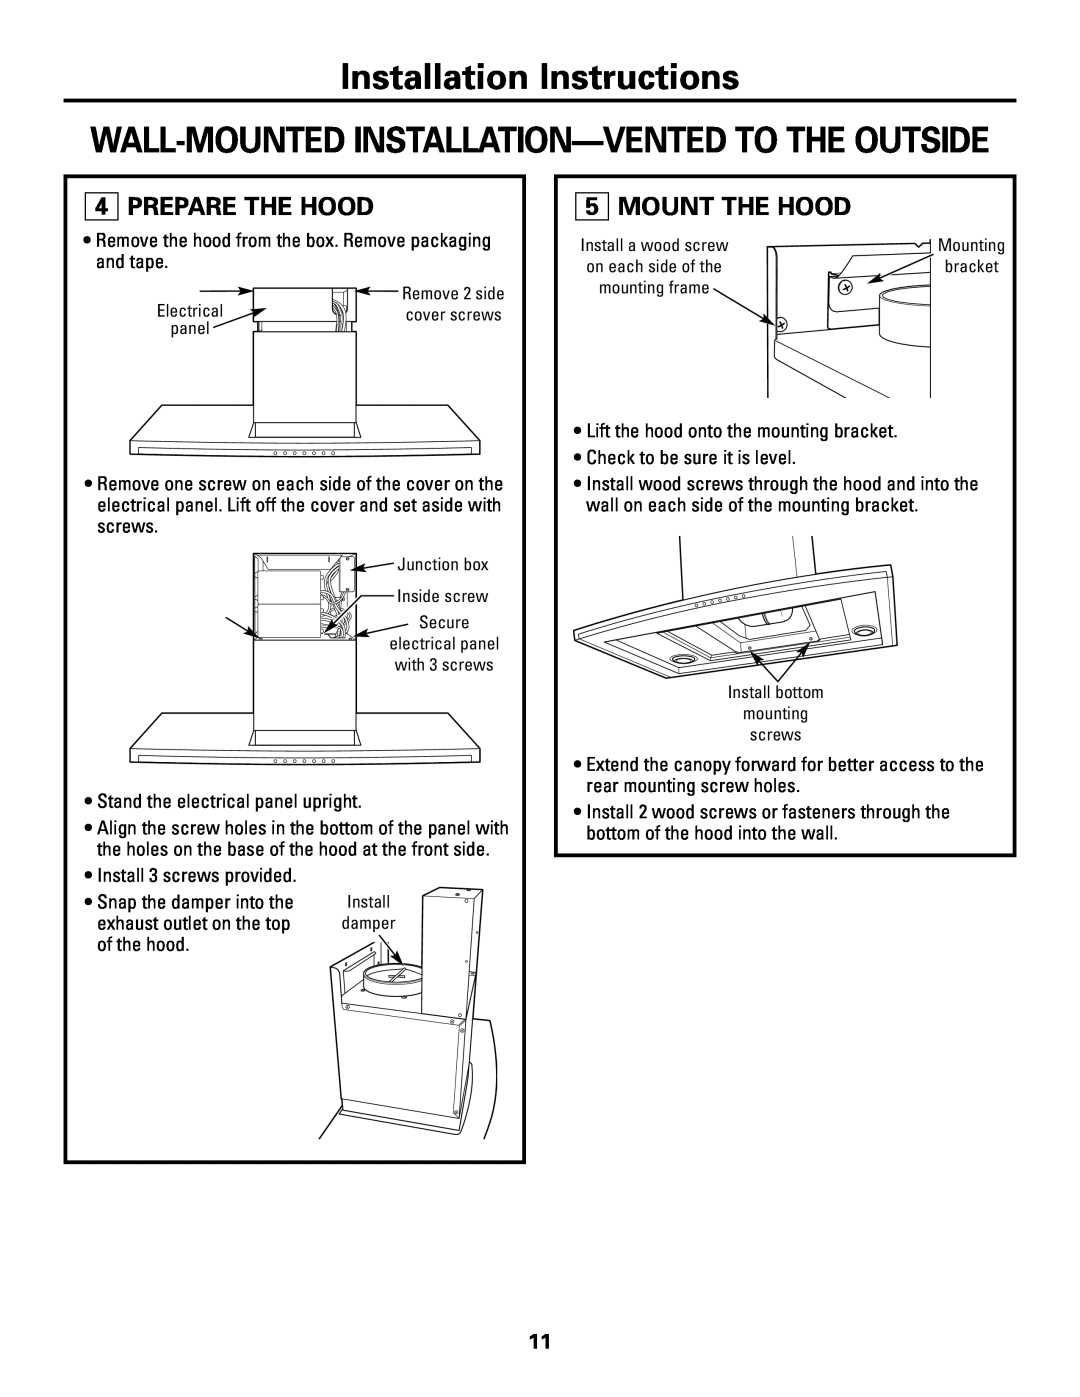 GE ZV800 Prepare The Hood, Mount The Hood, Installation Instructions, Wall-Mounted Installation-Vented To The Outside 